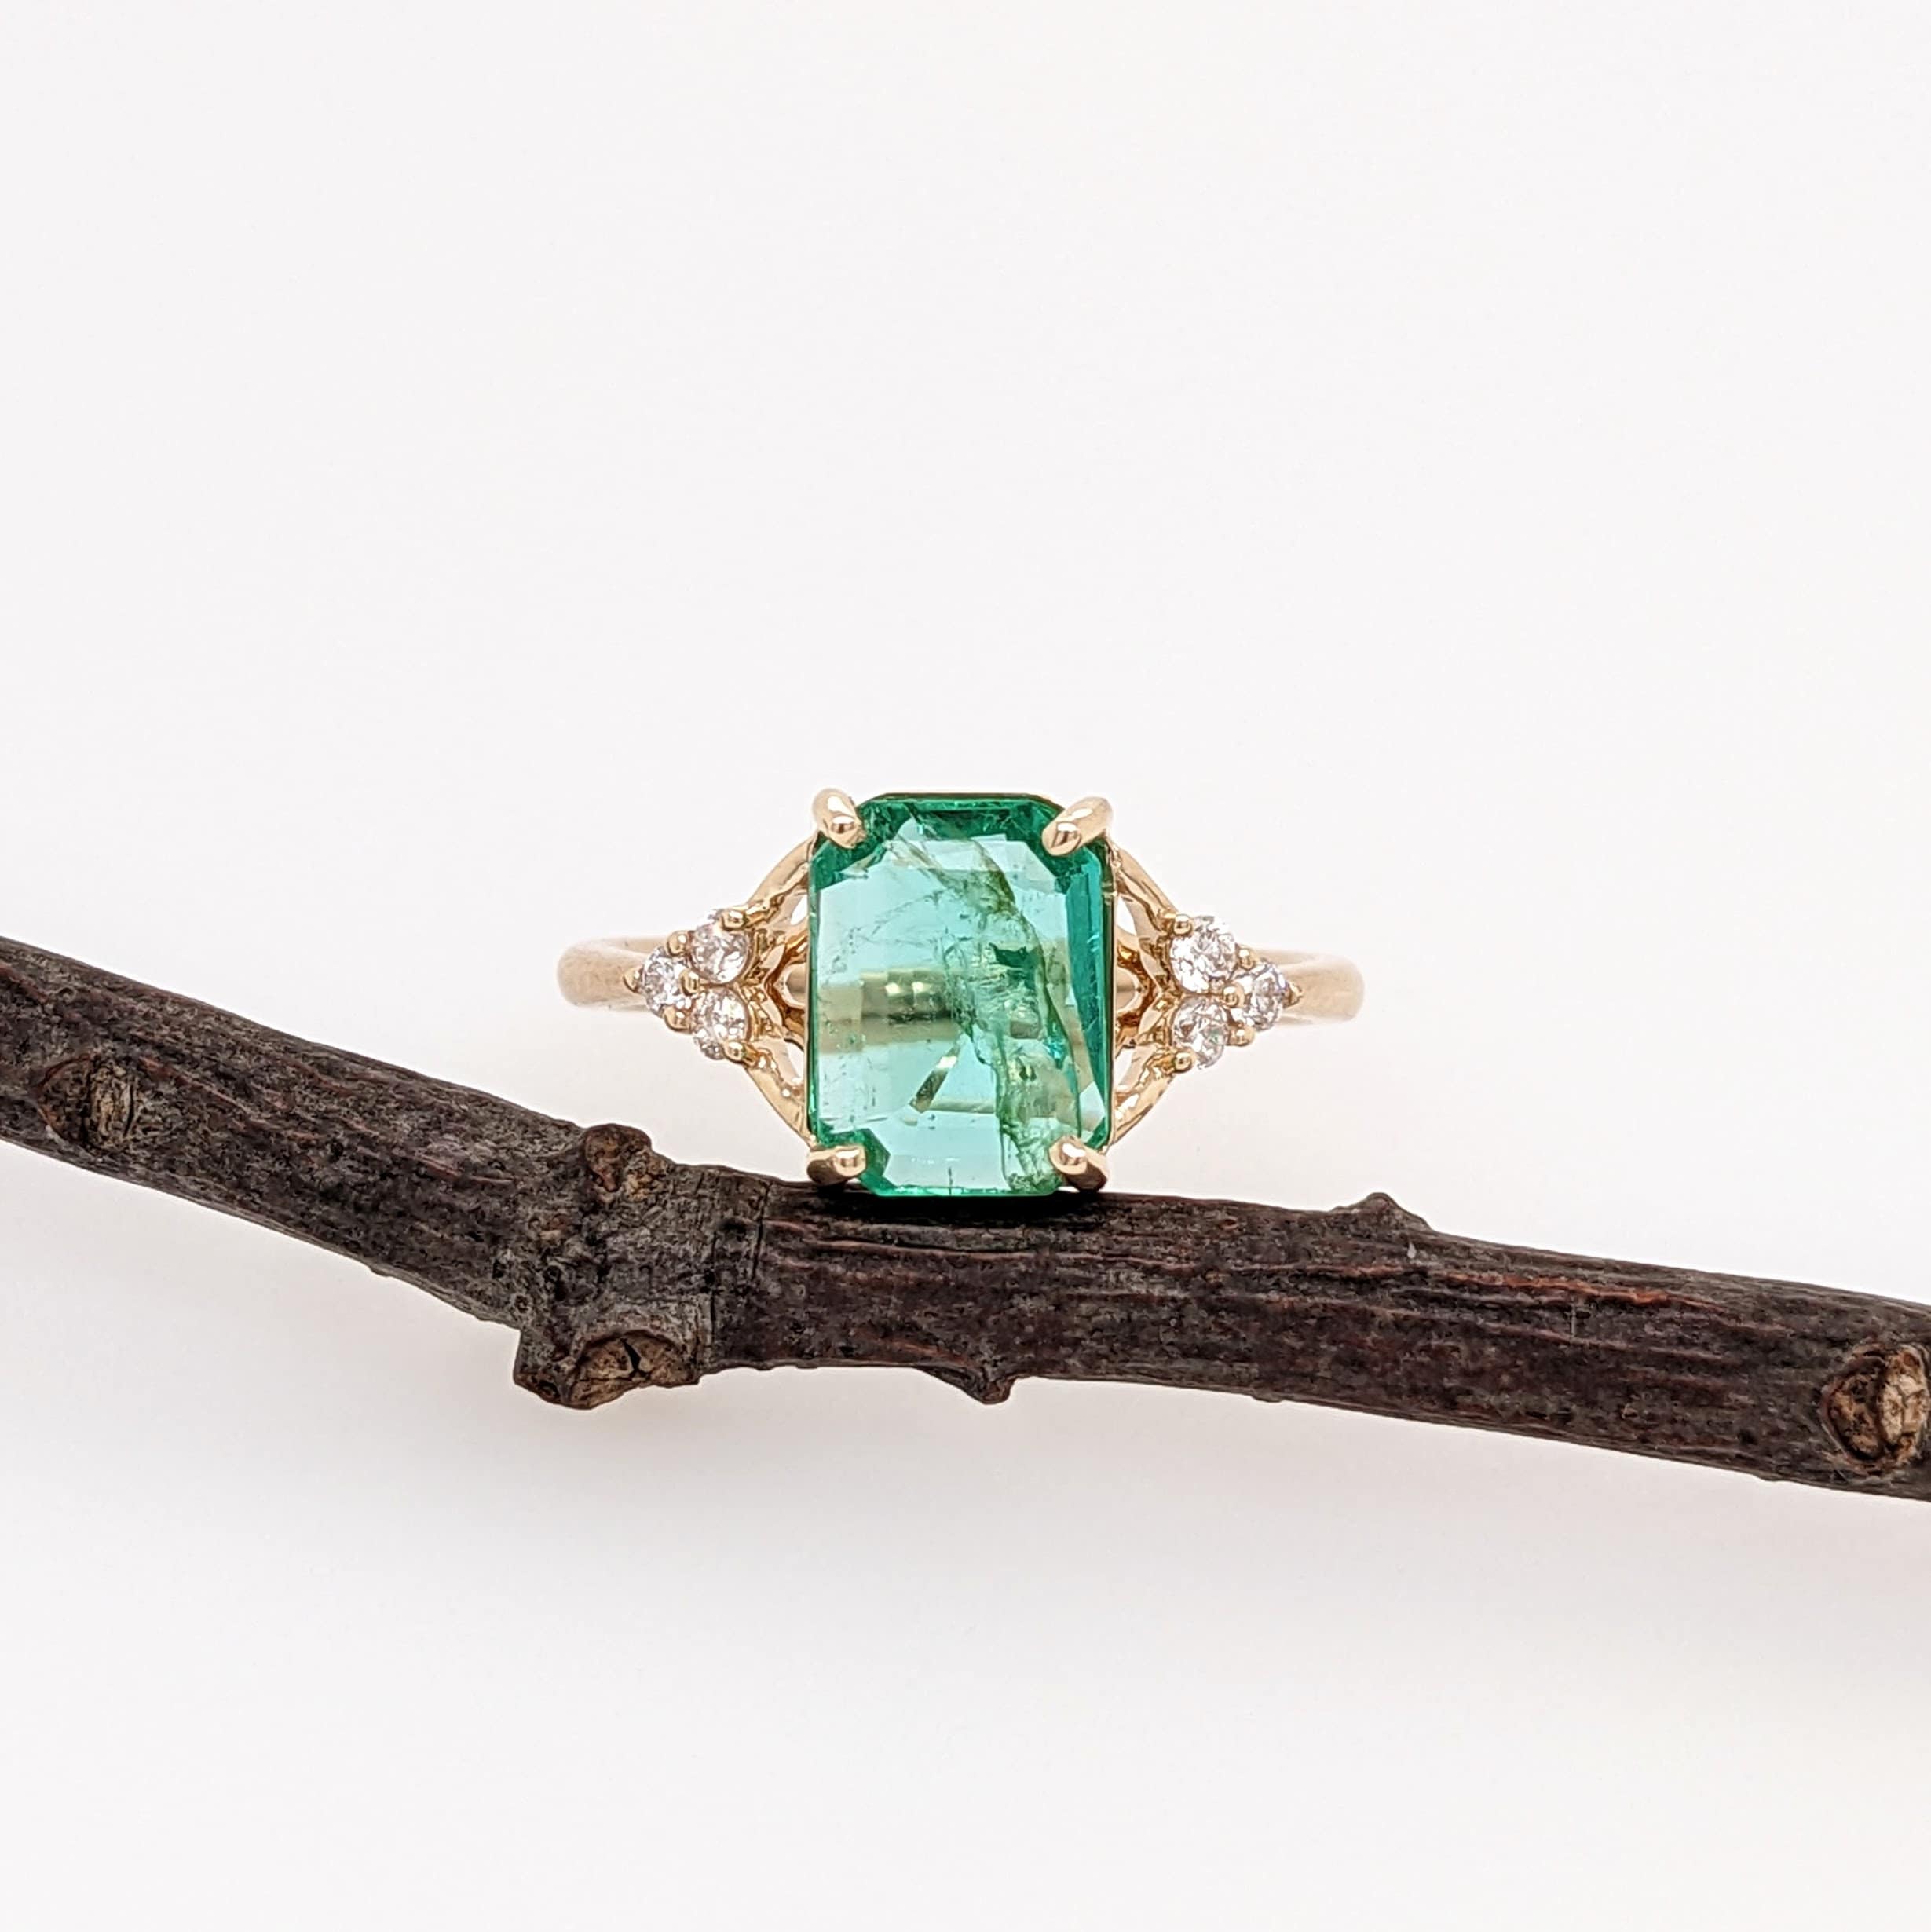 Classic Ethiopian Emerald Ring in Solid 14k Yellow Gold with Natural Diamond Accents | Emerald cut 9x7mm | May Birthstone | Dainty Ring